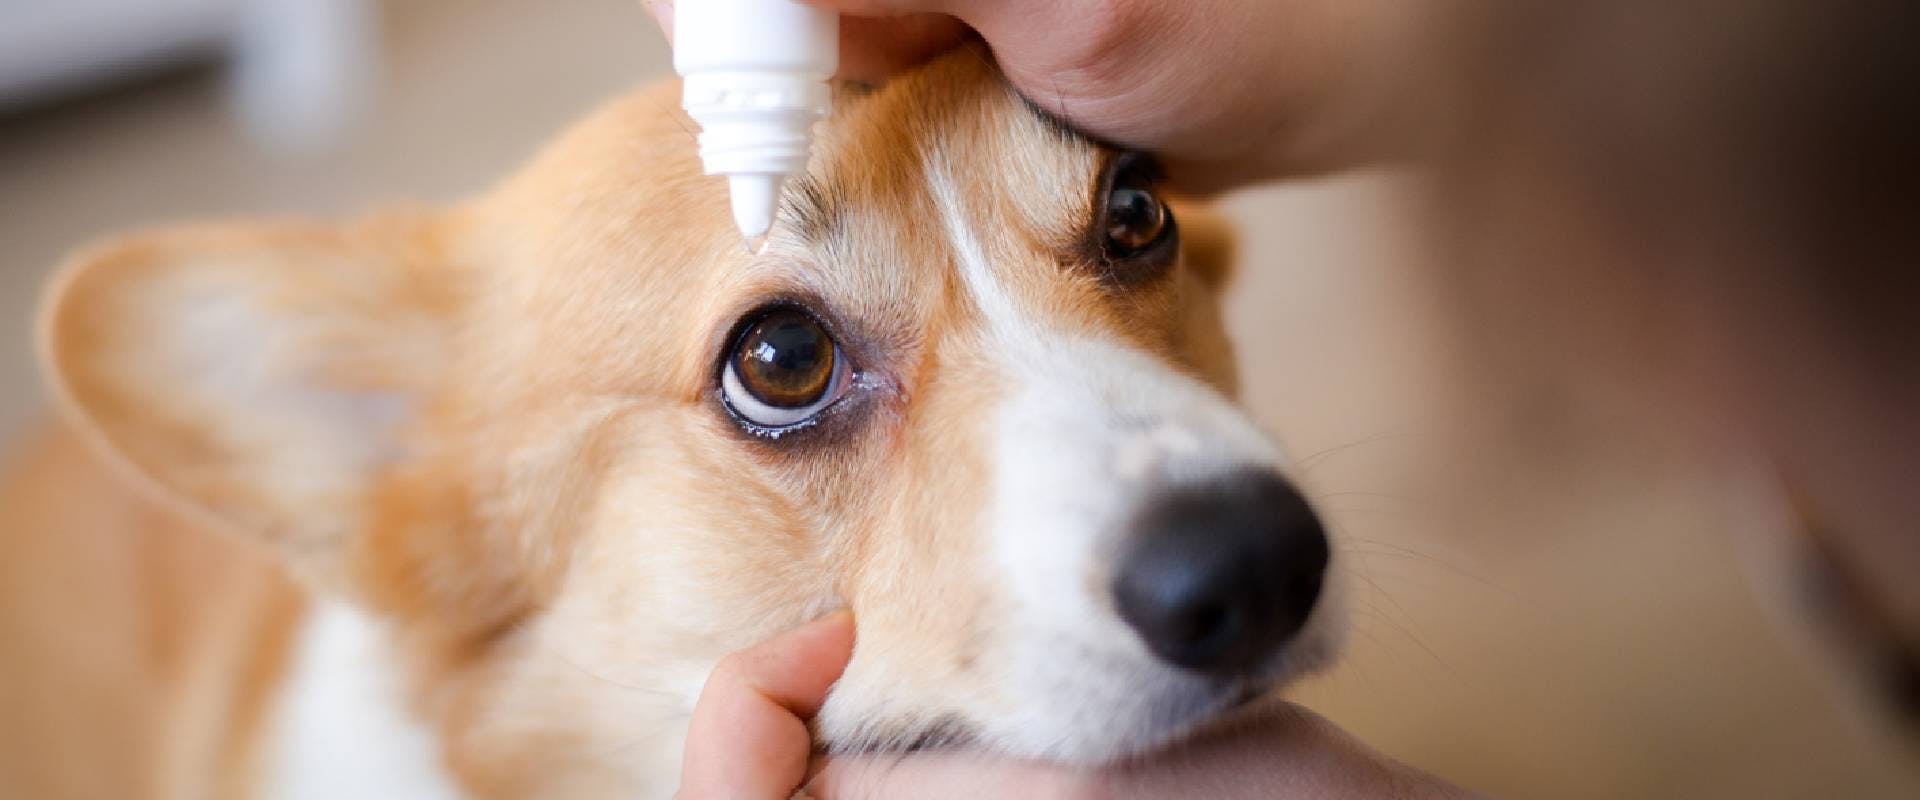 Close-up of an owner applying eye drops in dog's eye